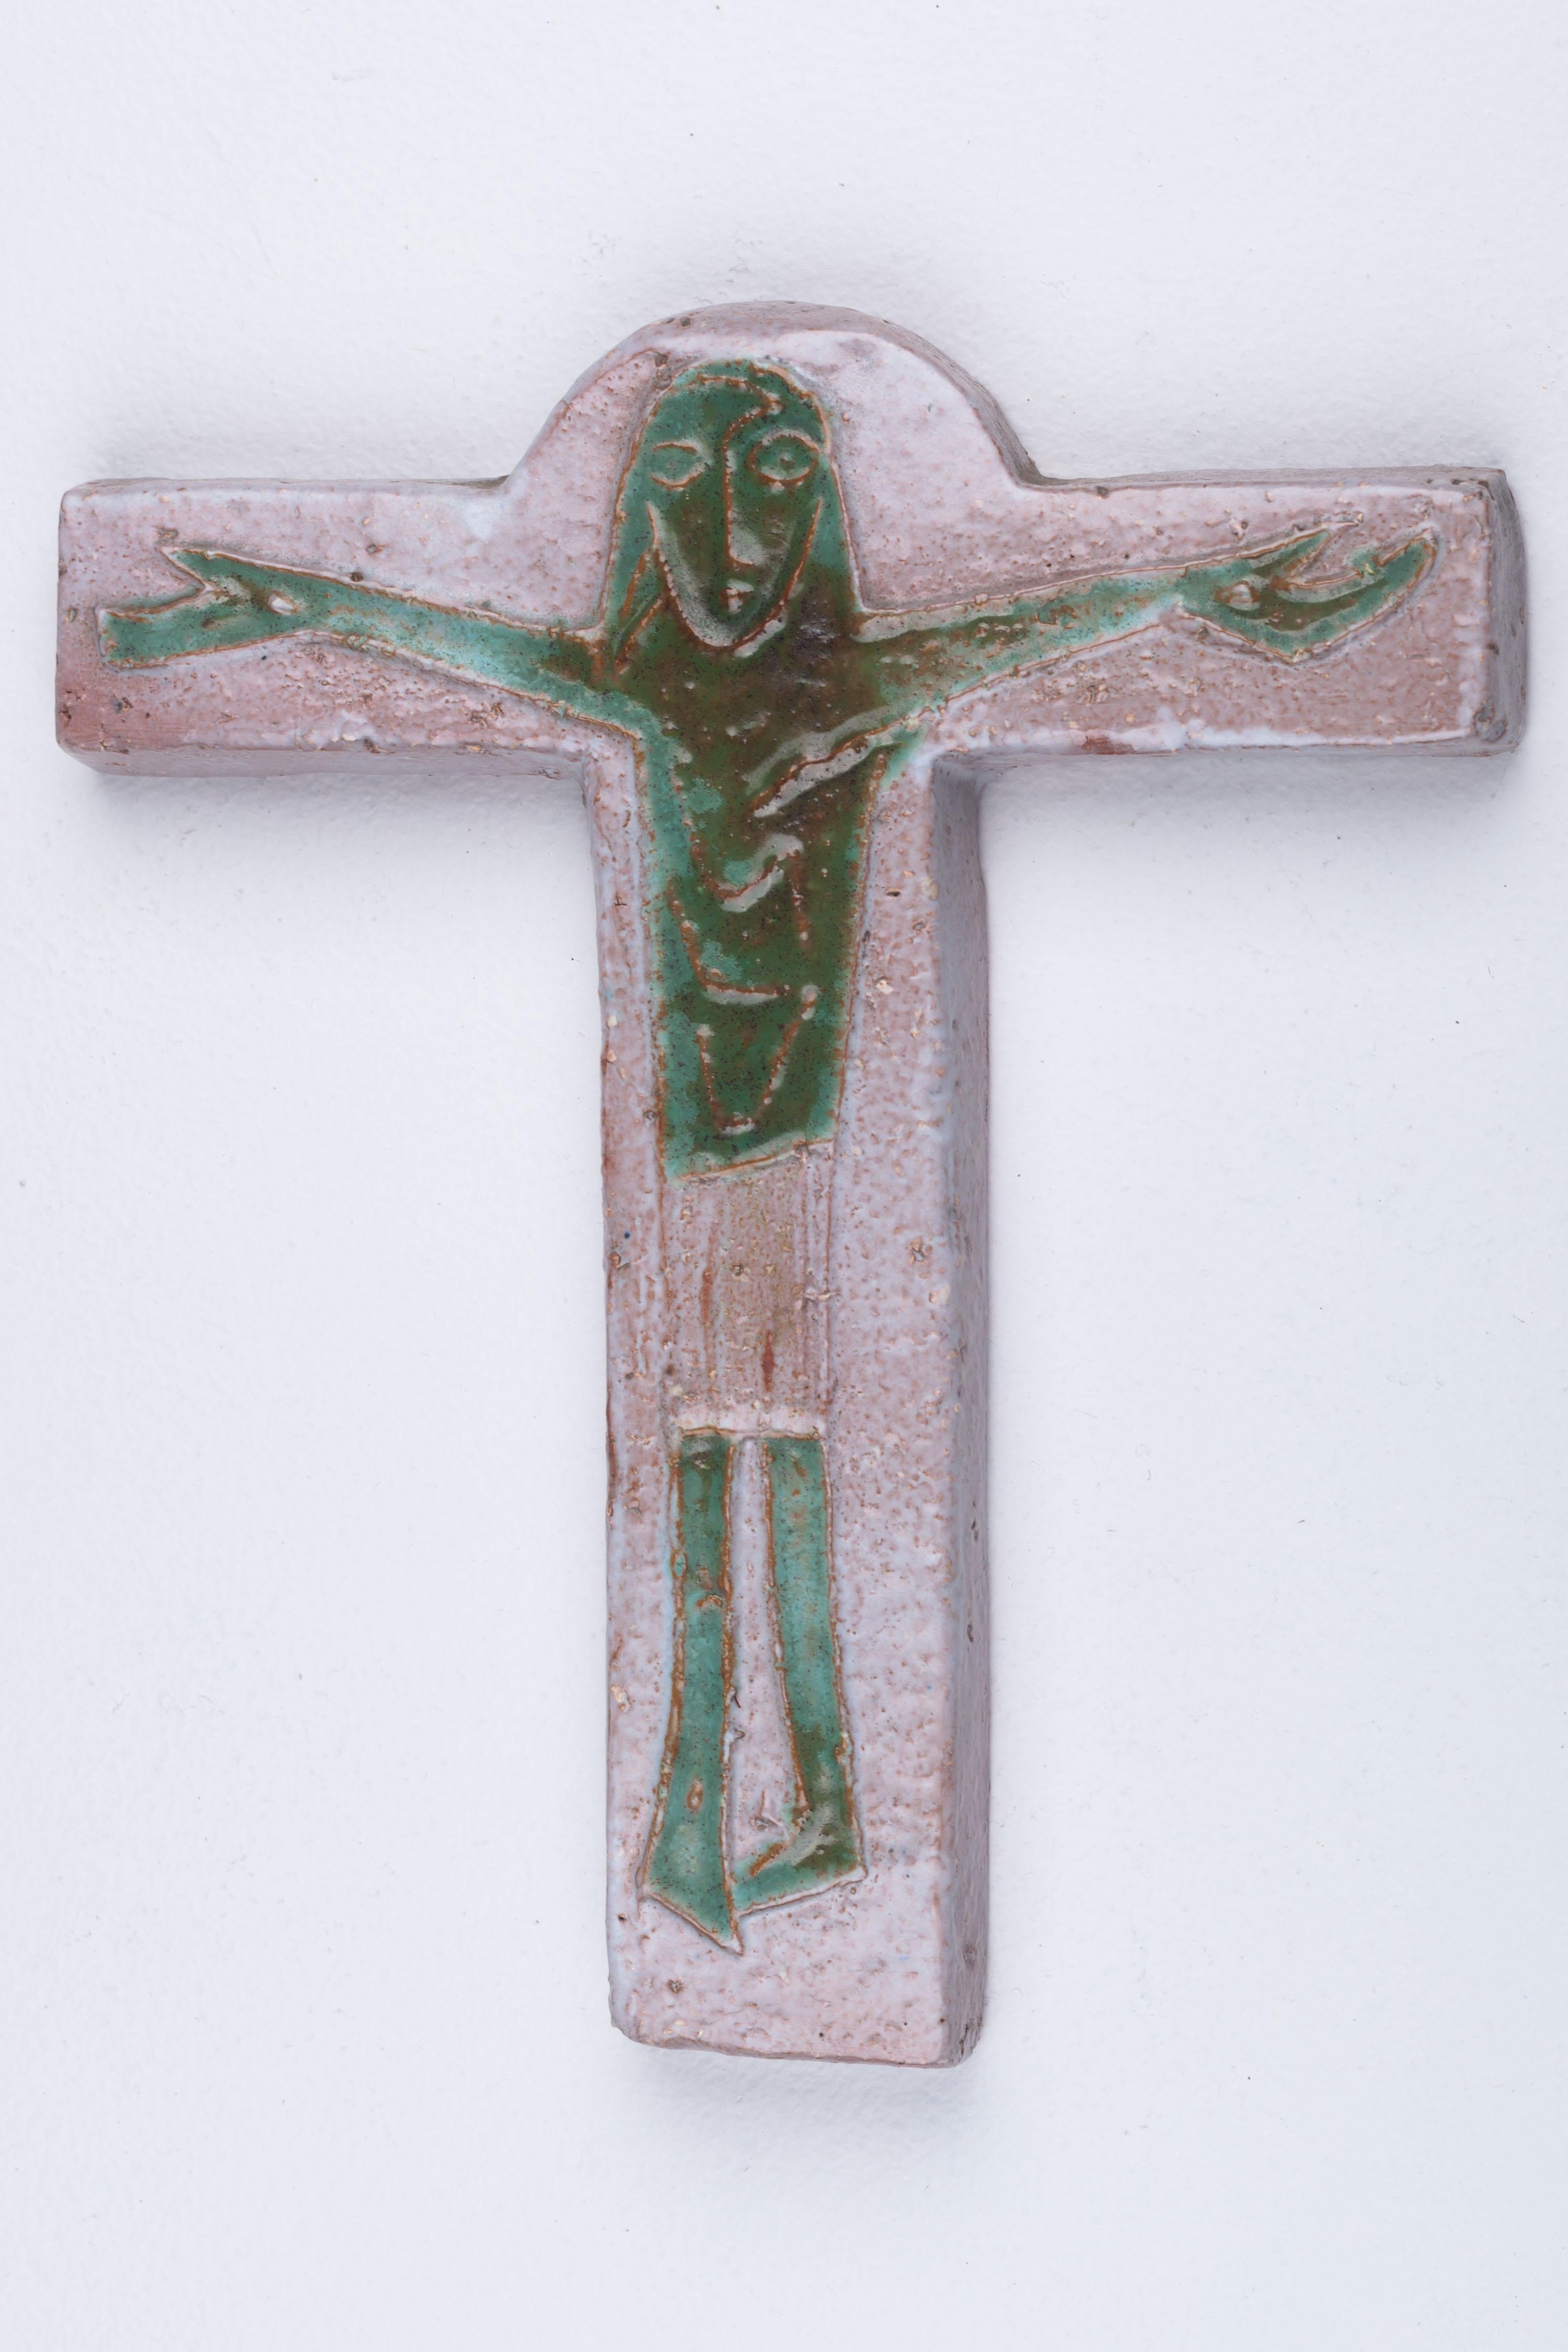 This remarkable midcentury piece crafted in textured, slate-like ceramic, is part of our extensive collection of crosses meticulously handmade by Flemish artisans.

The focal point of this cross is its otherworldly green Christ figure. Its